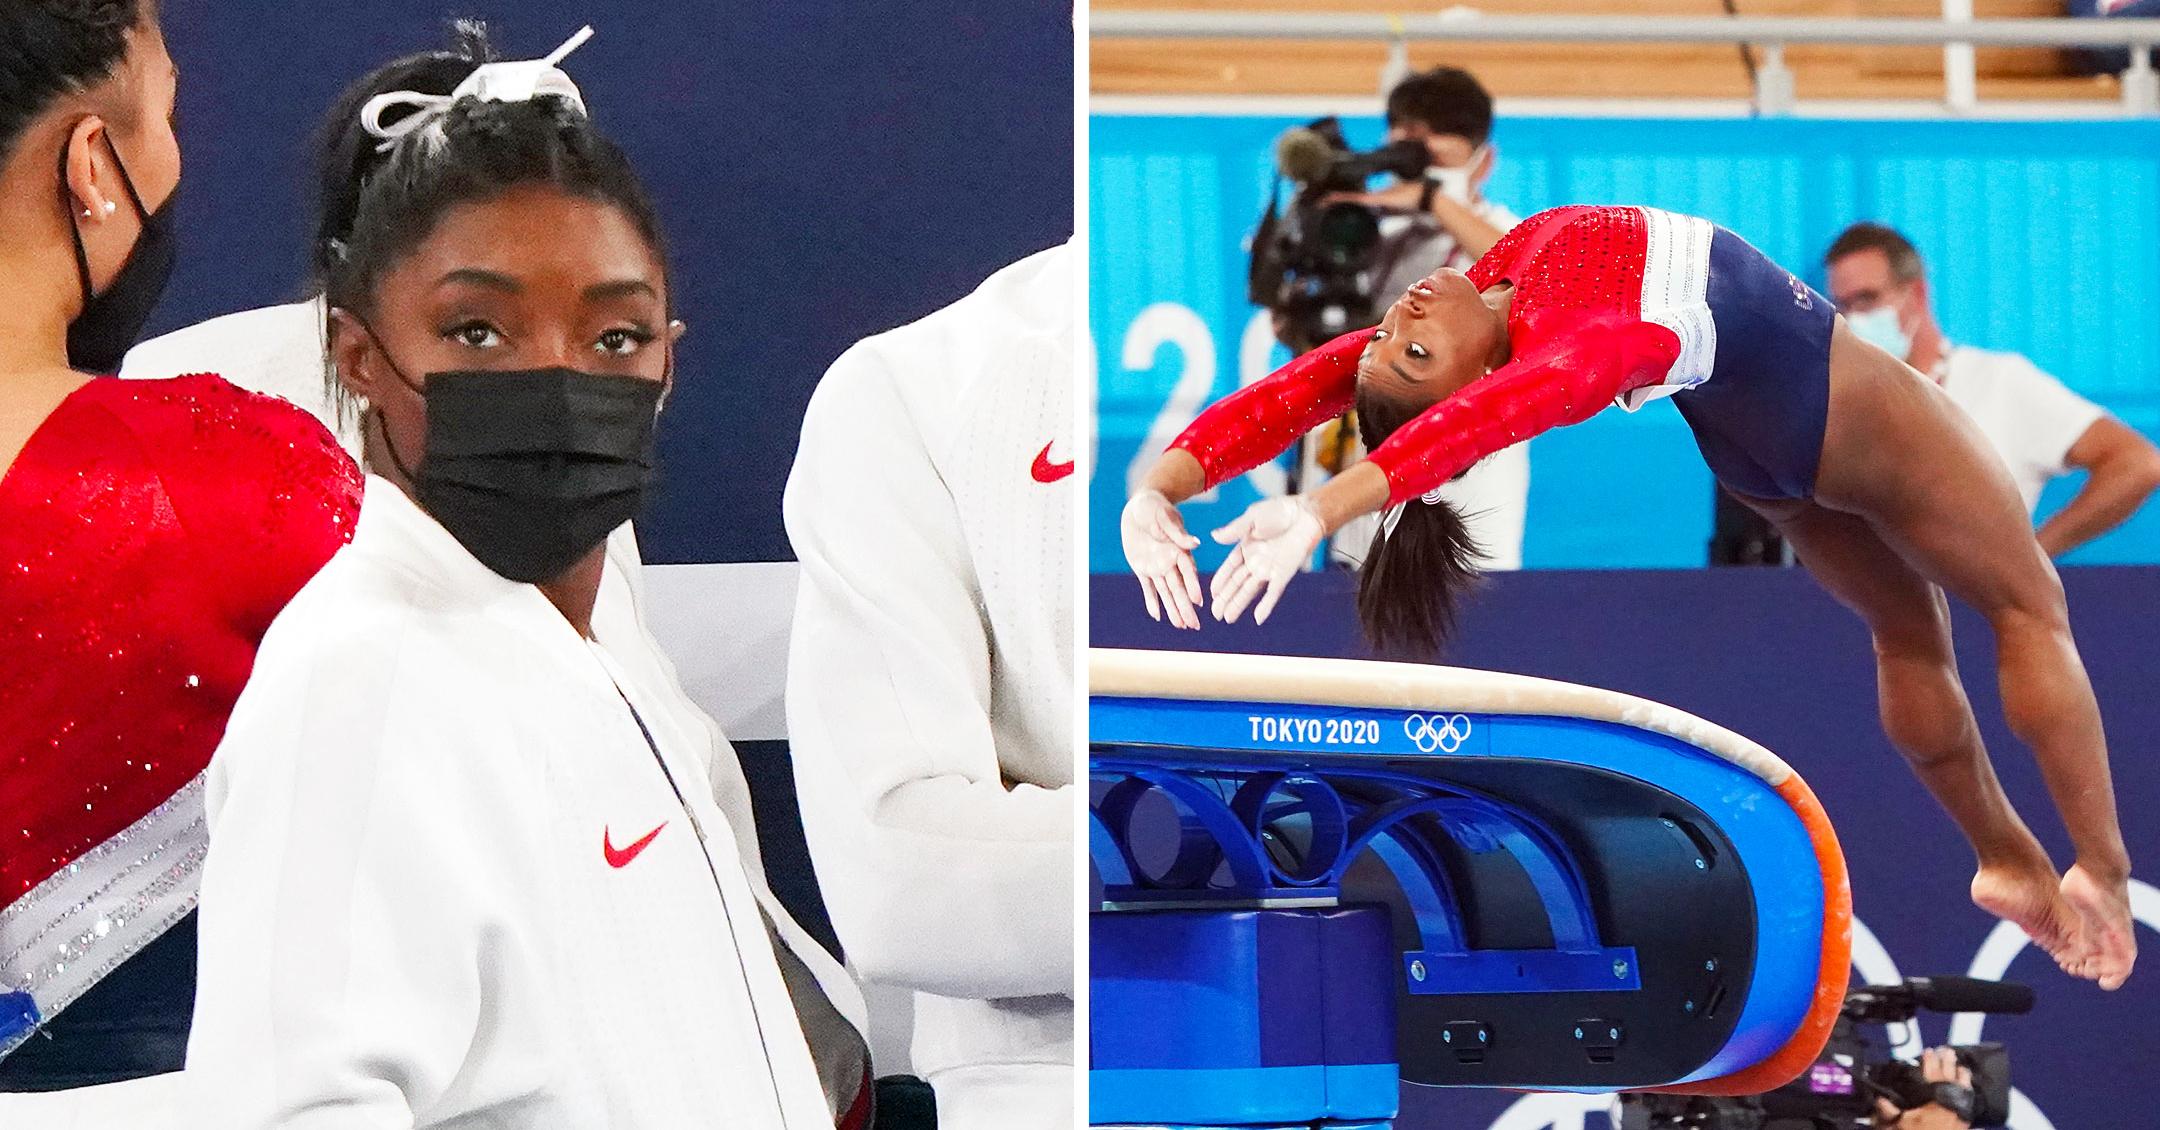 Simone Biles Pulls Out Of Olympics Team Gymnastics Final Due To Injury